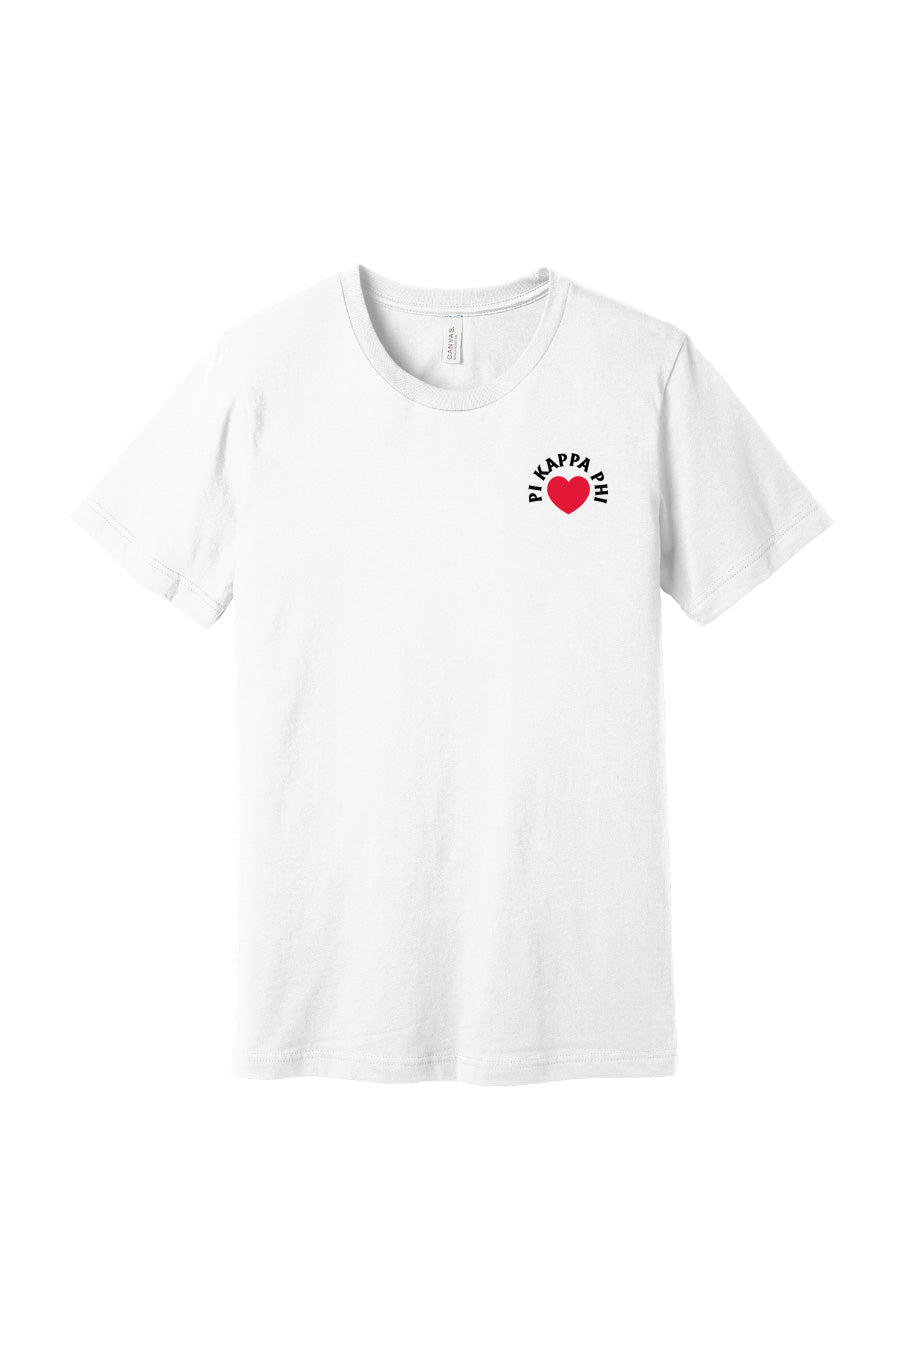 What's in Your Heart Tee